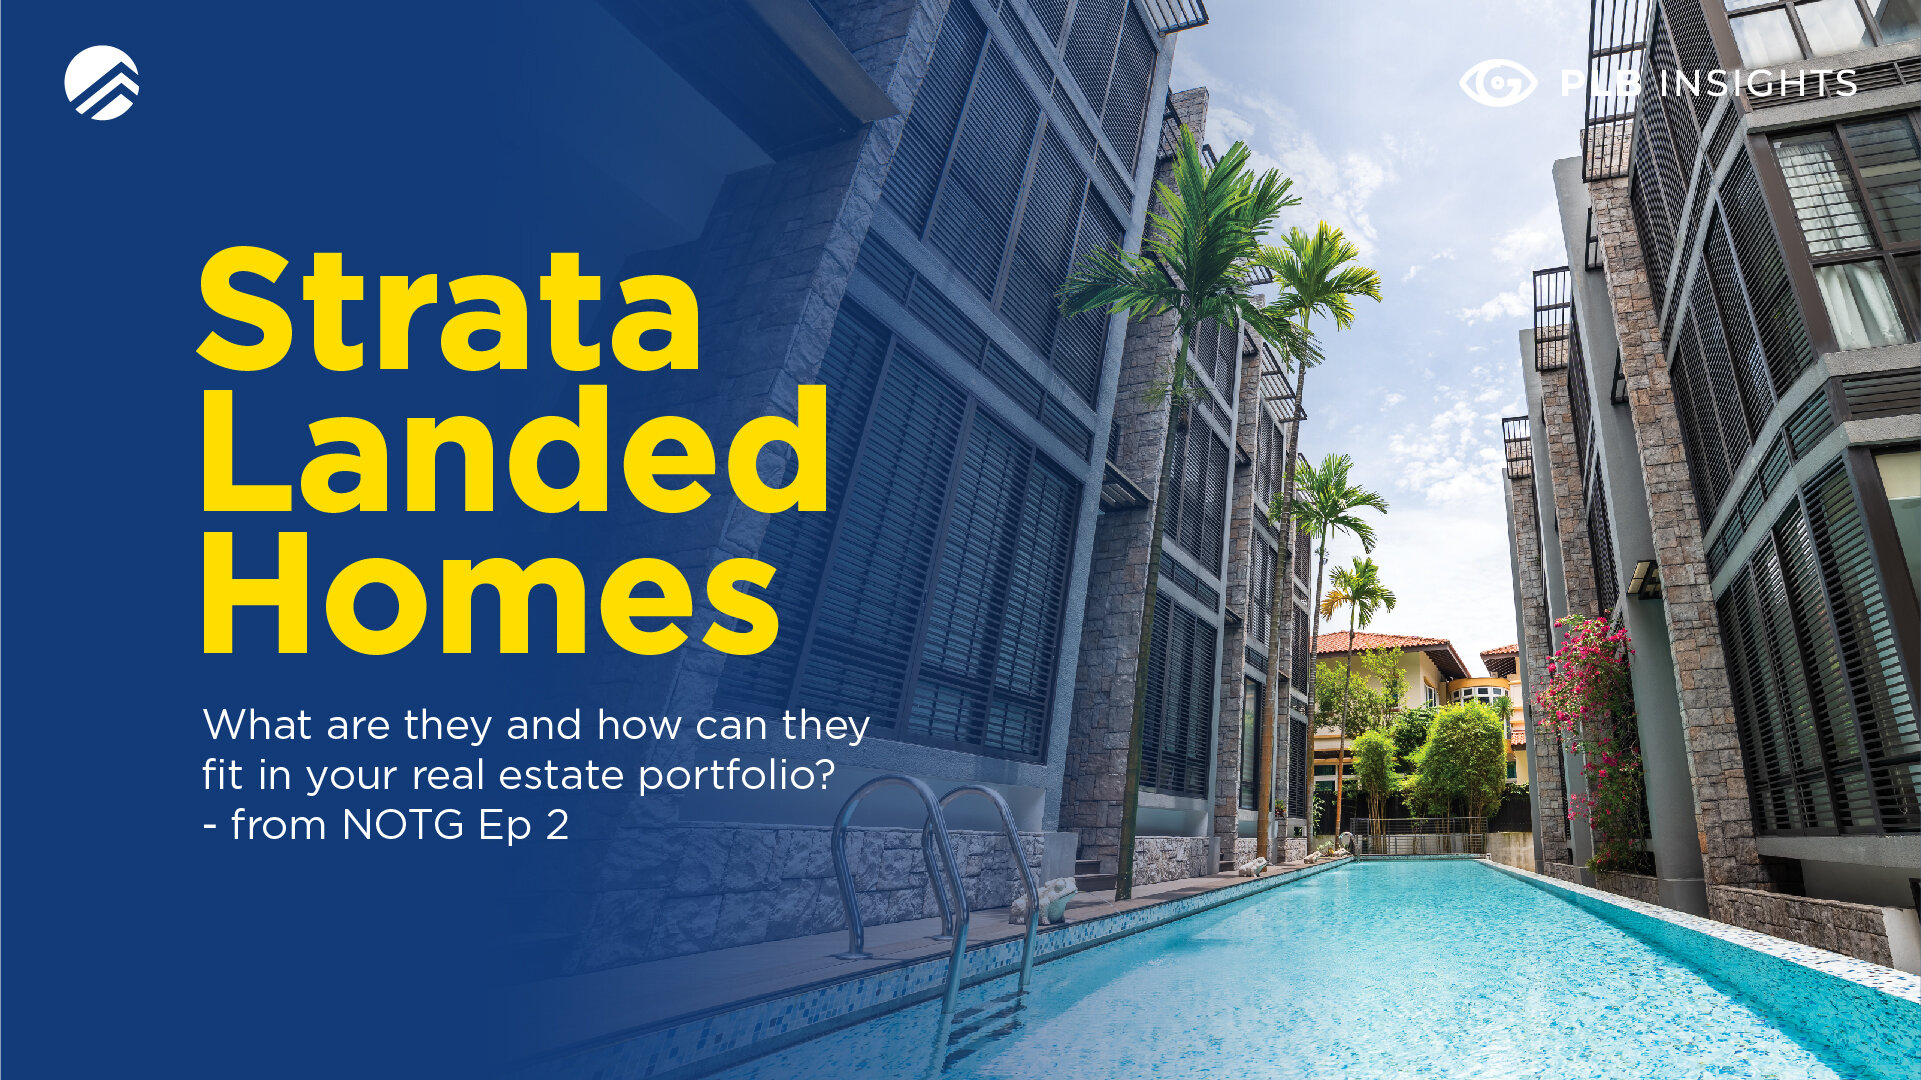 Strata Landed Homes_Article Cover.jpg